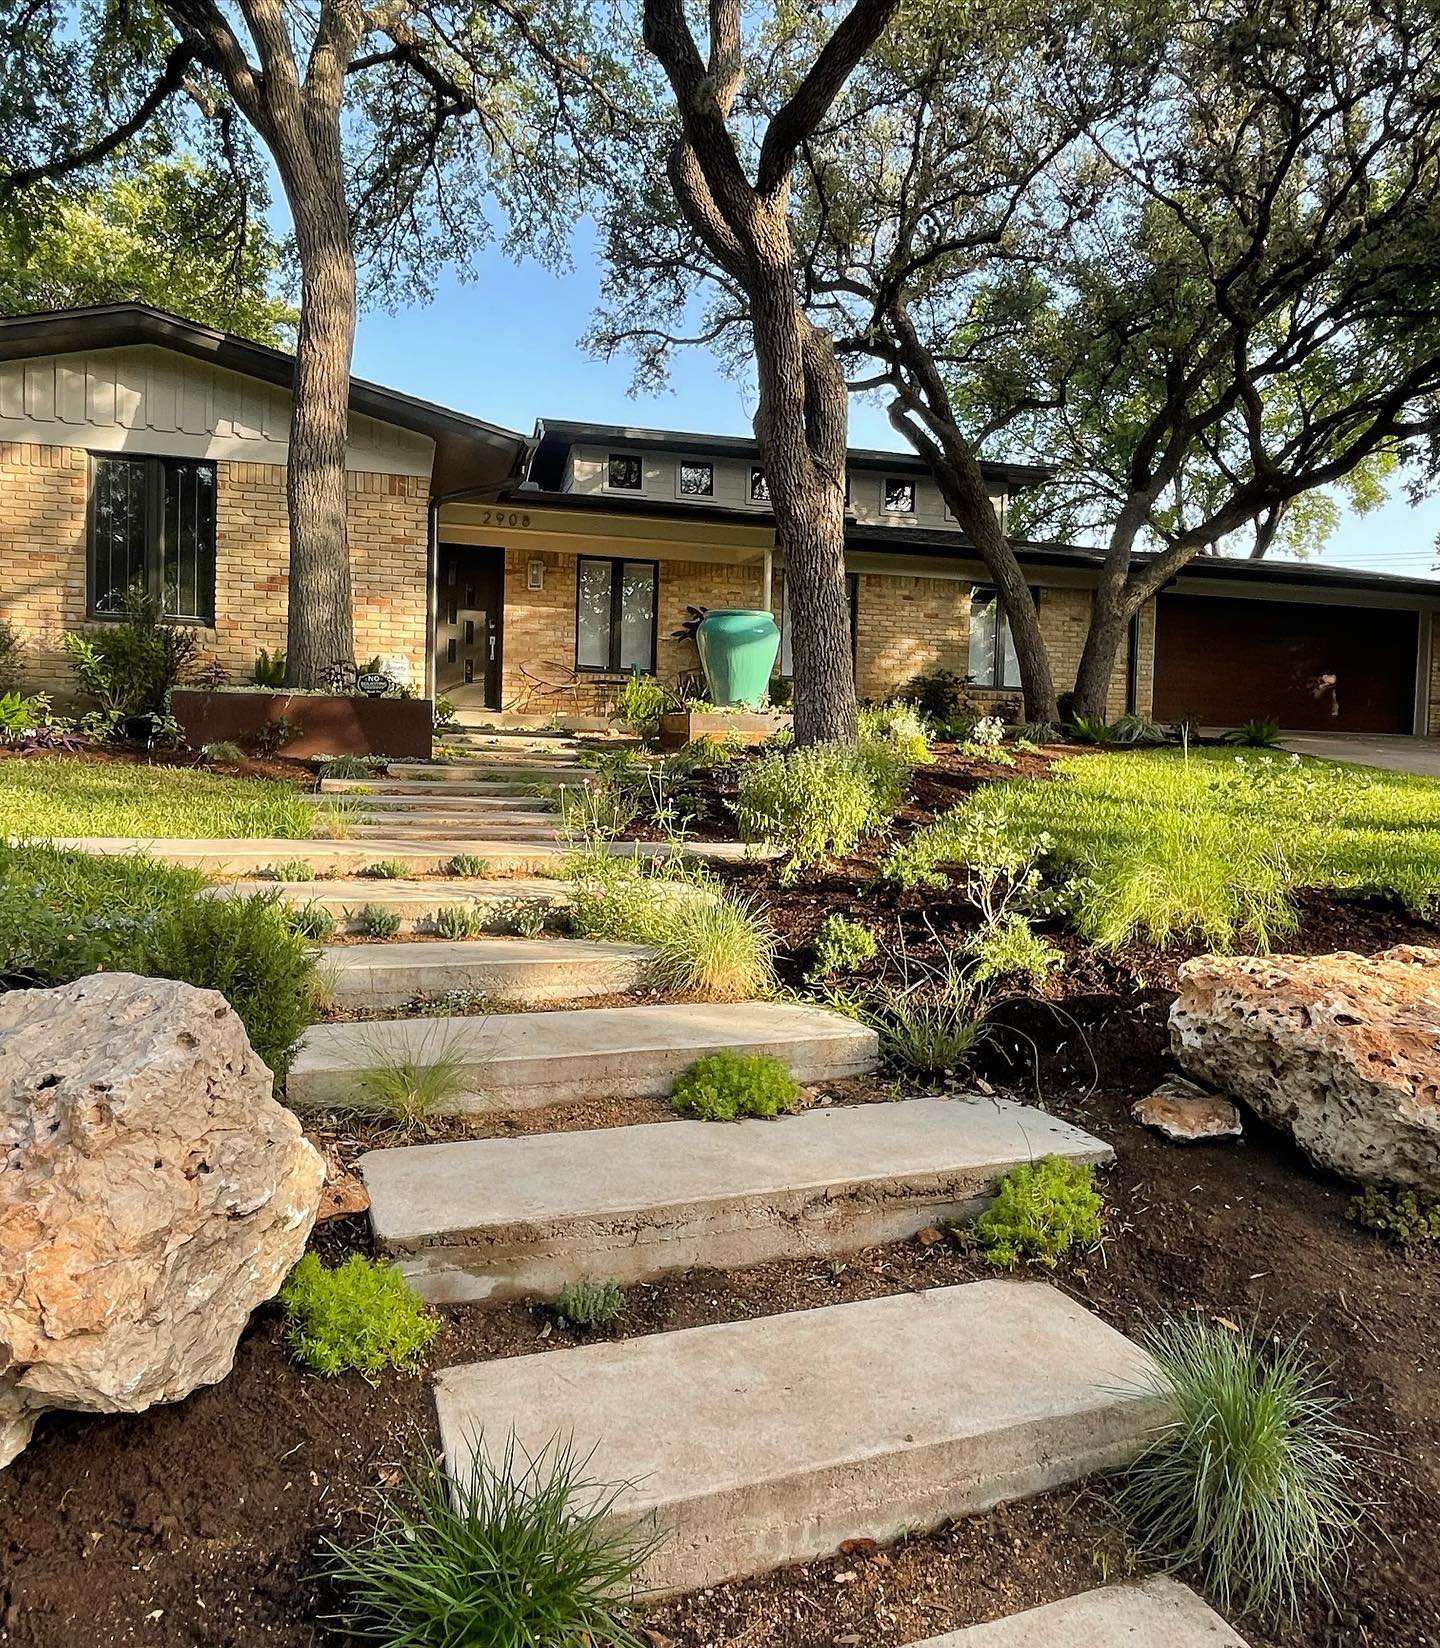 Mid-century home with stepping stones in front yard located in Barton Hills neighborhood in Austin, TX. Photo by Instagram user @1102east